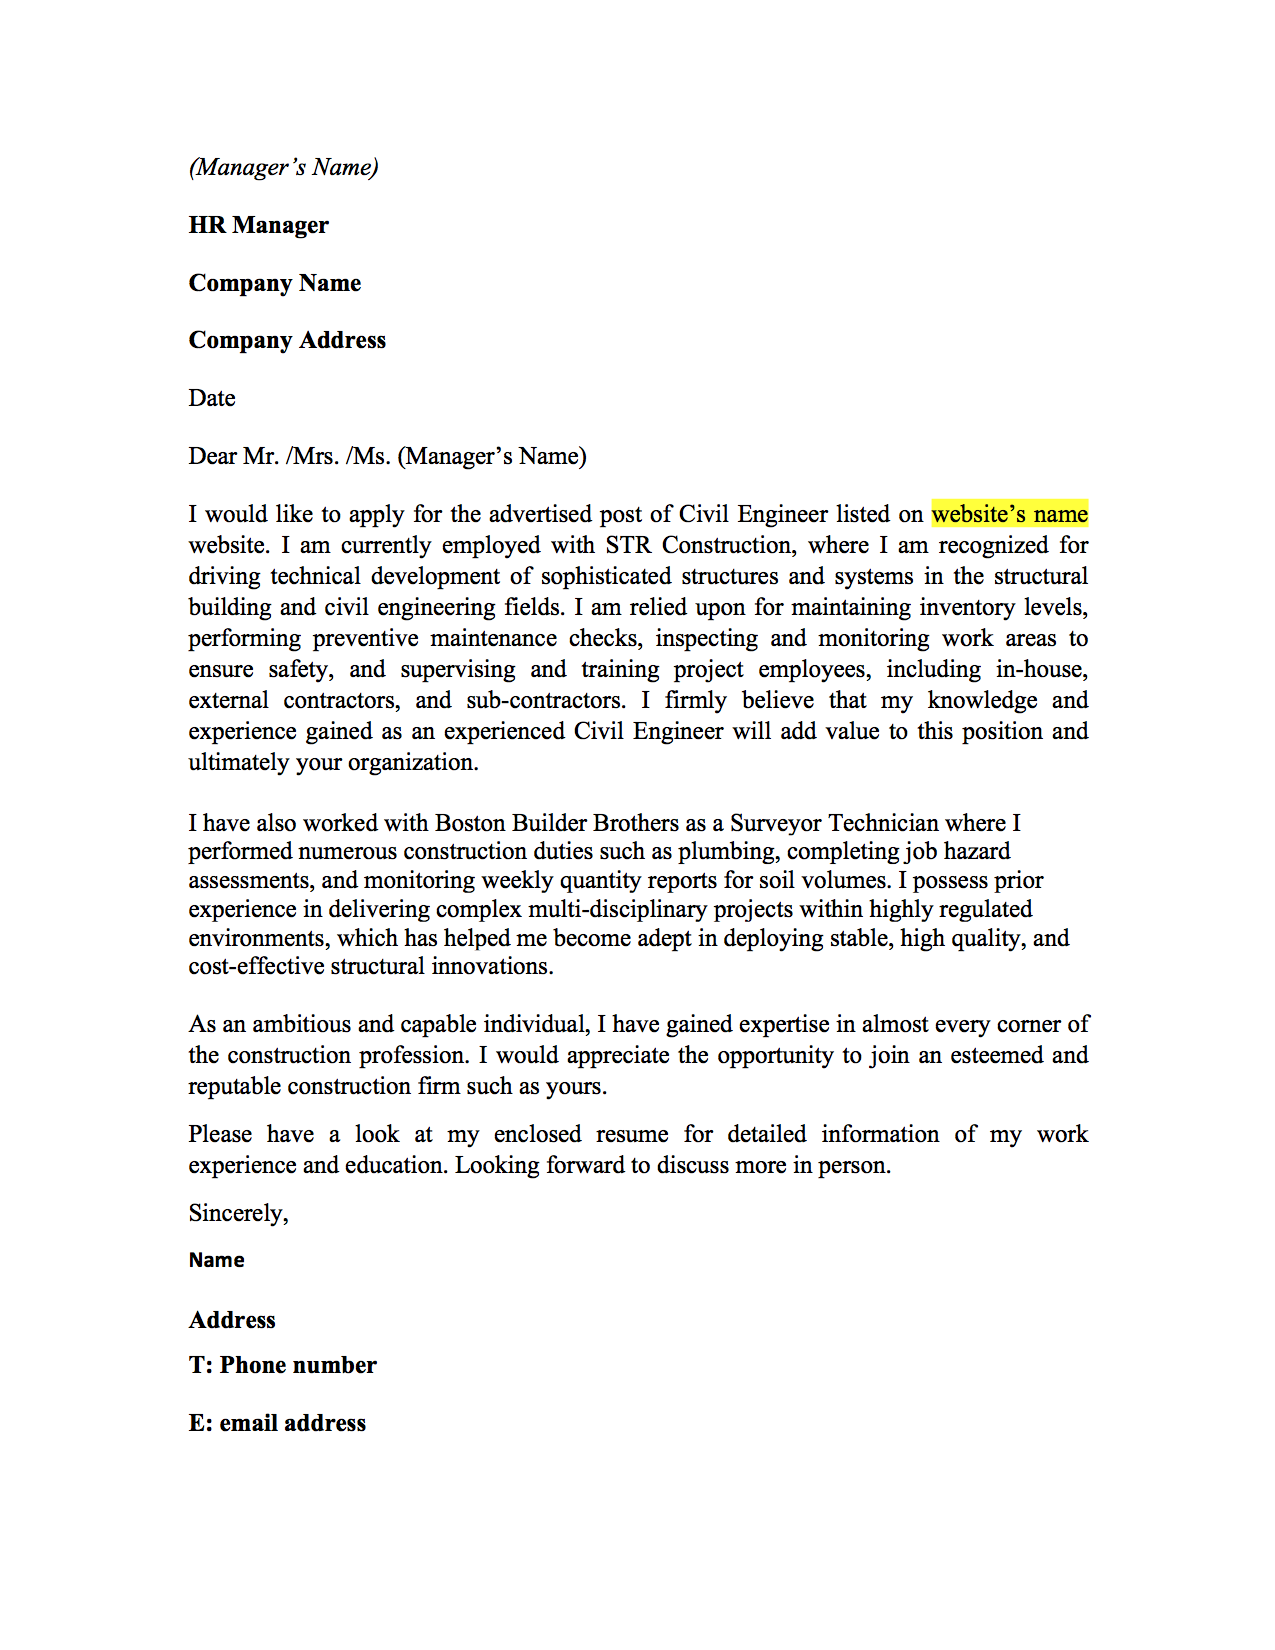 Construction management cover letter example